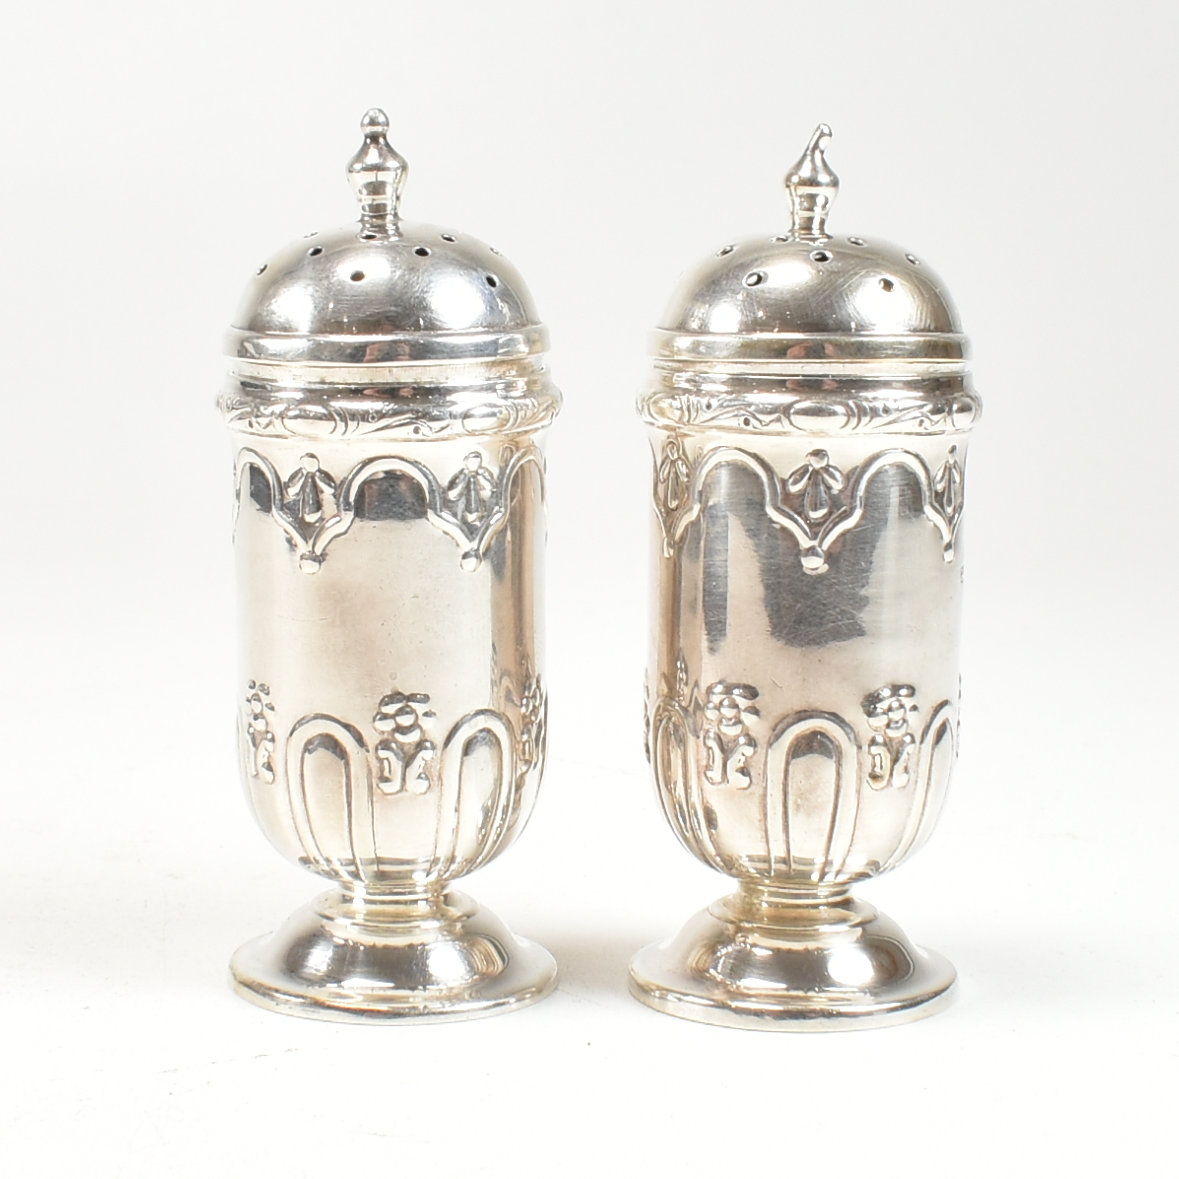 TWO EARLY 20TH CENTURY CASED HALLMARKED SILVER CRUET SETS - Image 3 of 9